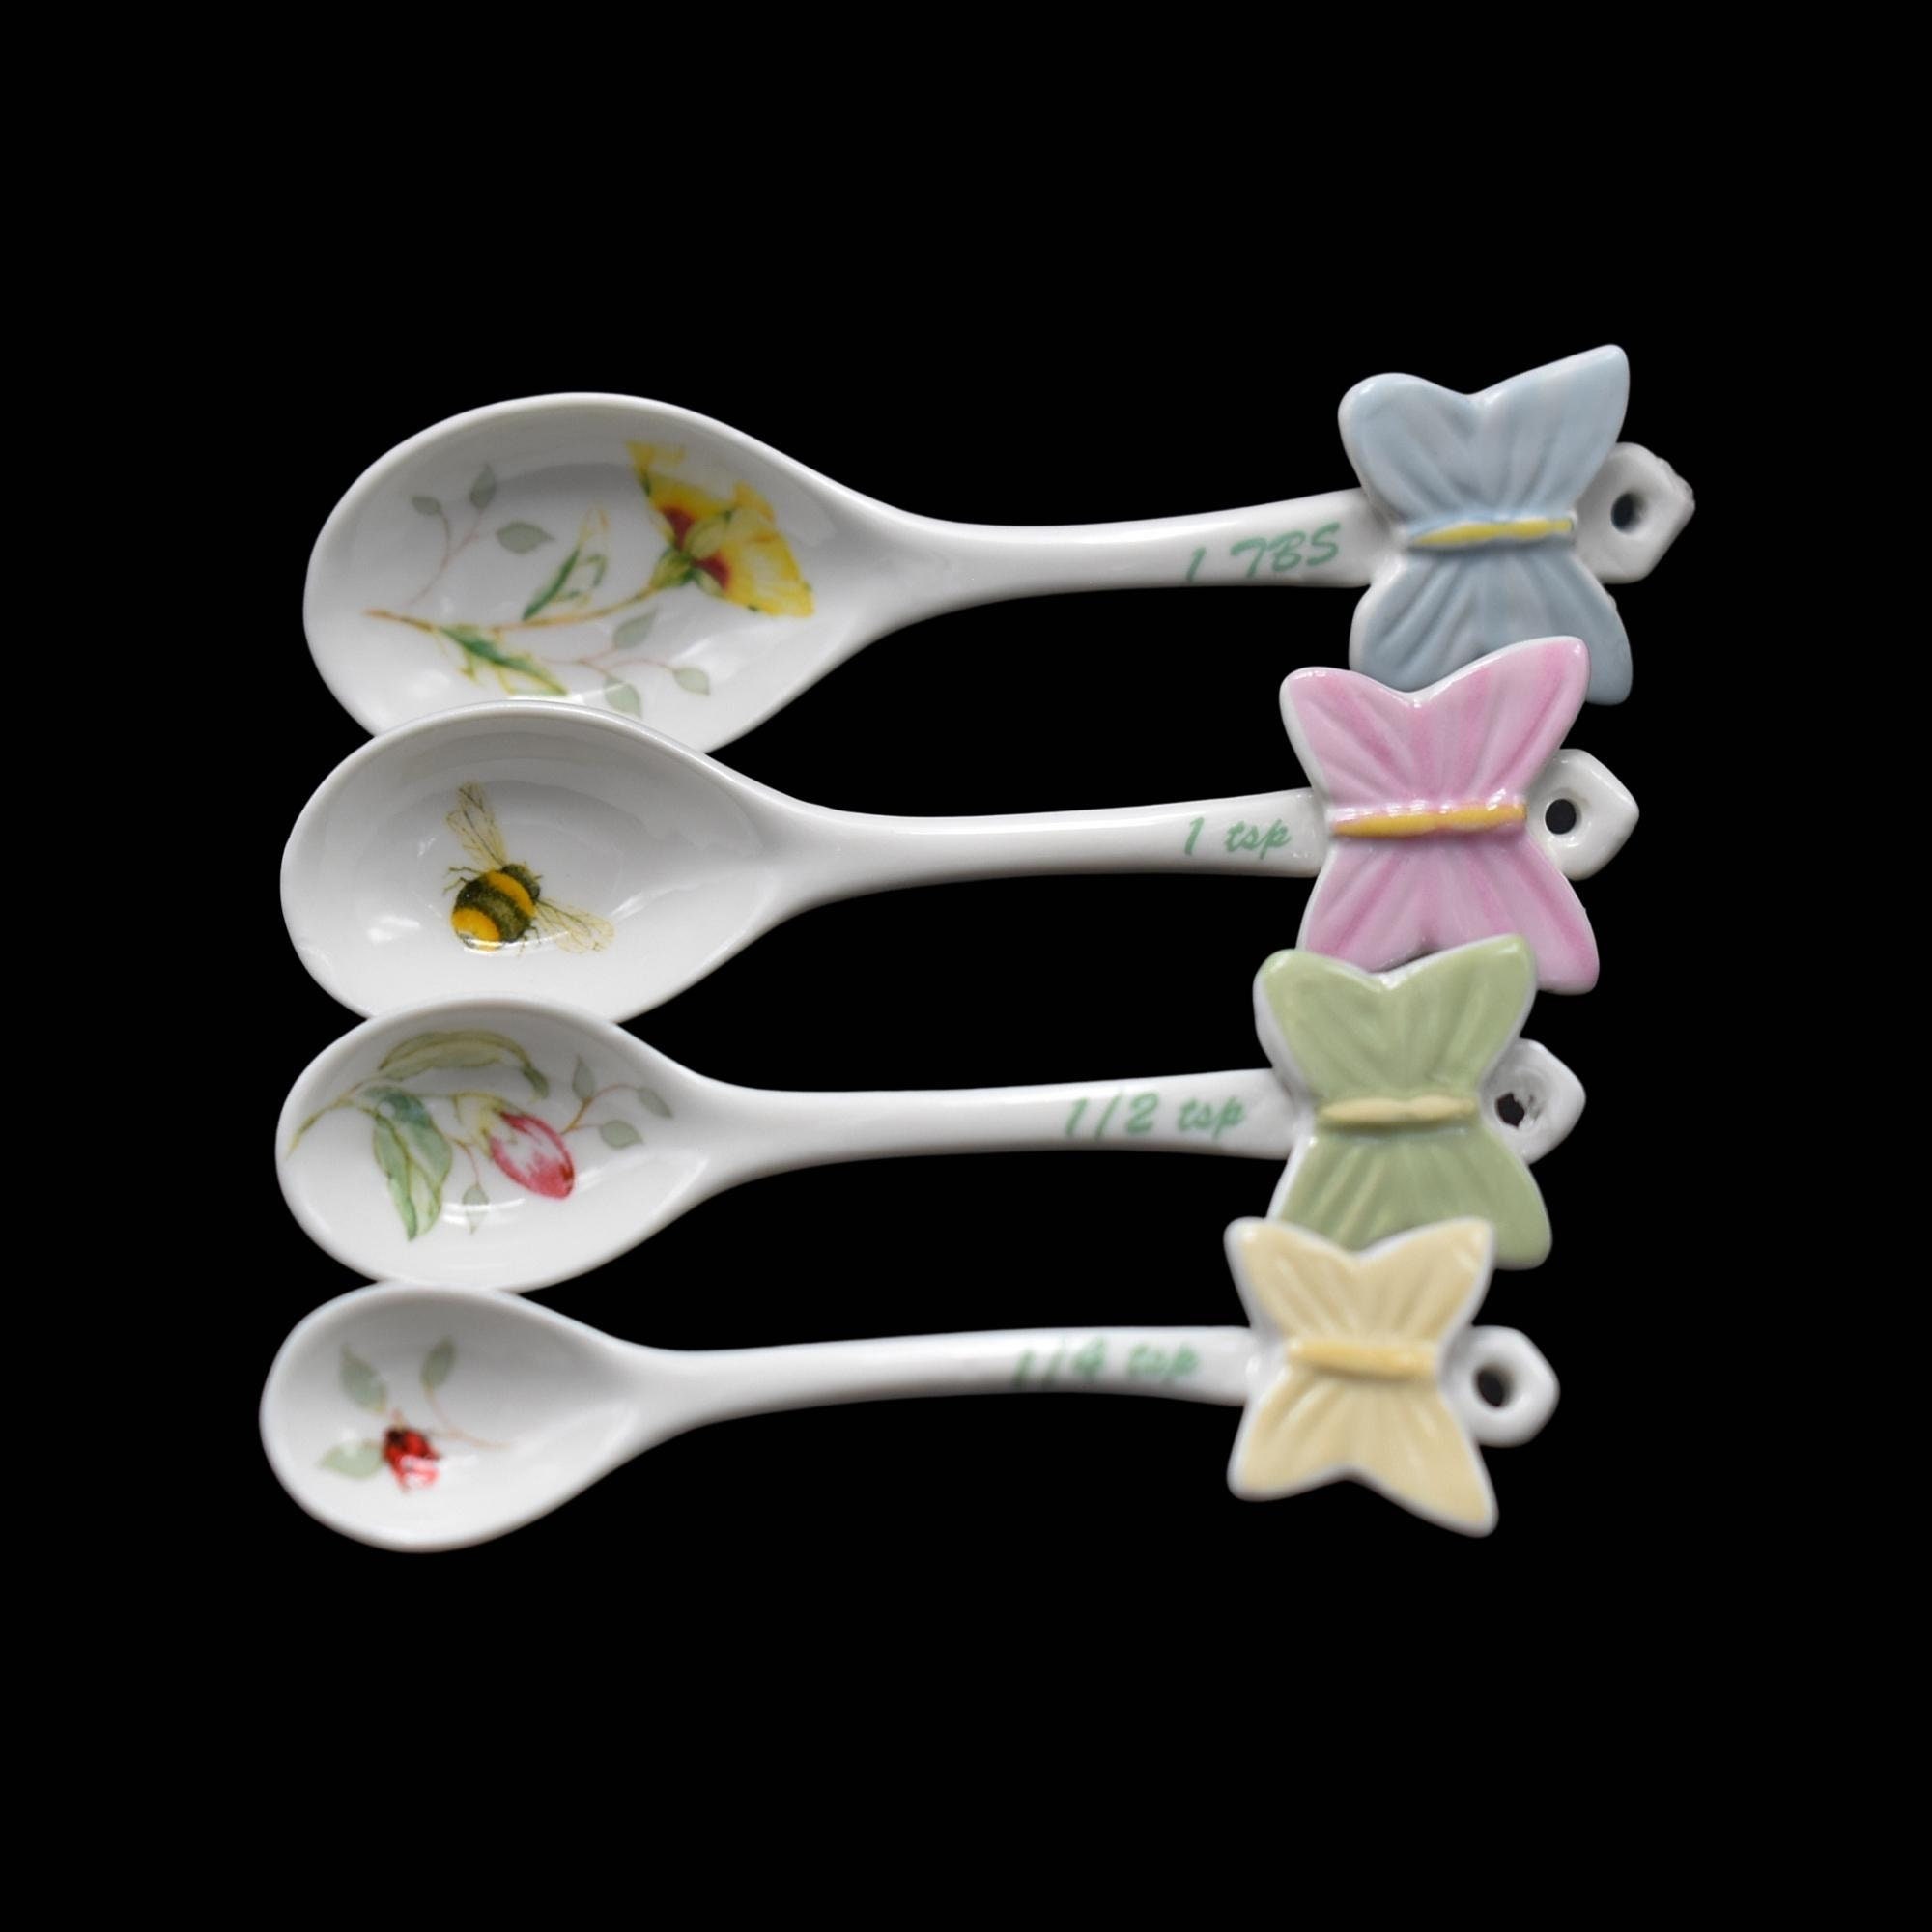 Magnetic Measuring Spoons – Shabby Chic Boutique and Tanning Salon